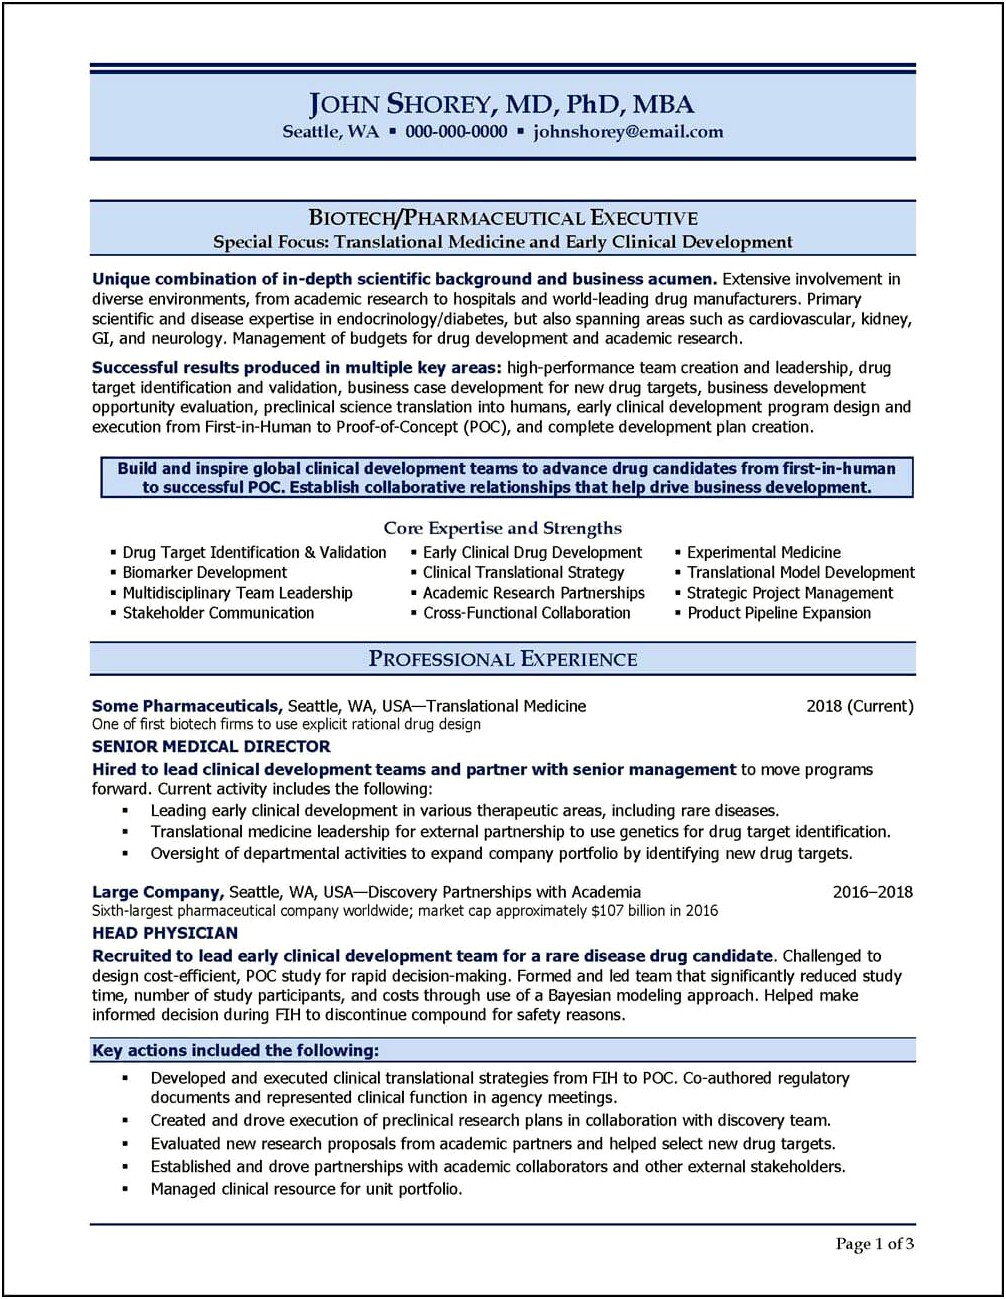 Resume For Biotech Industry Jobs